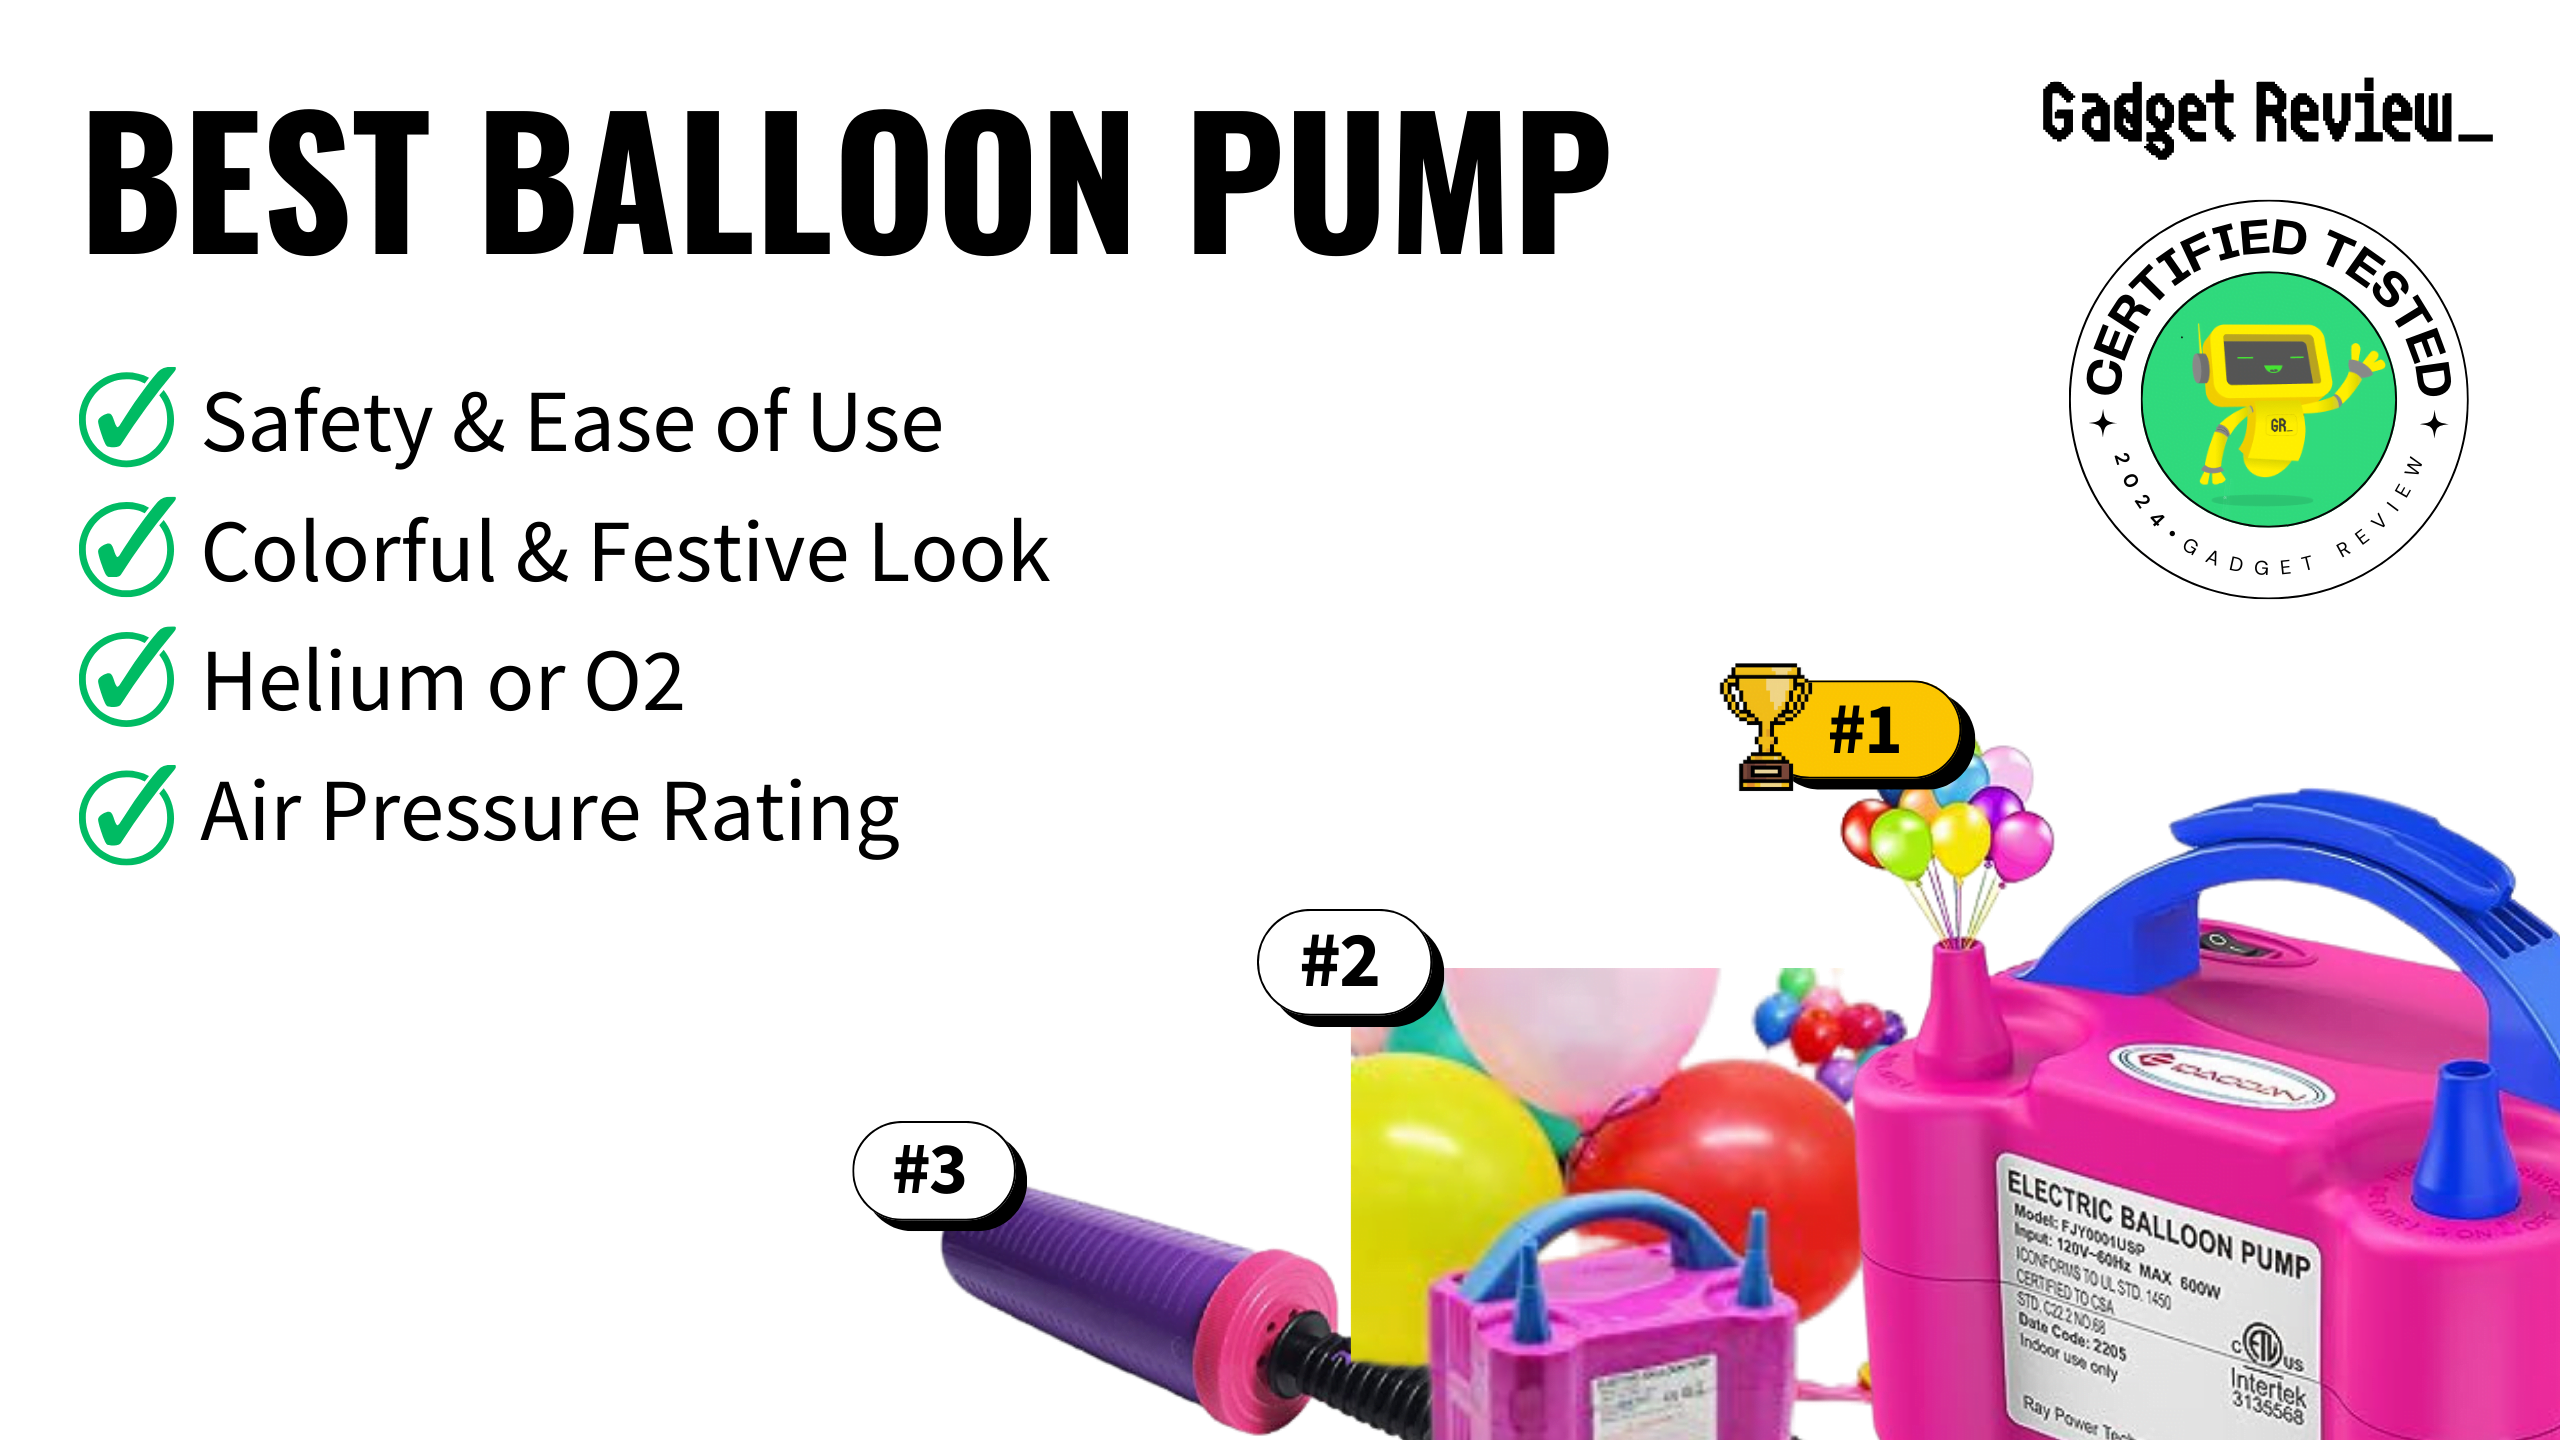 best balloon pump guide that shows the top best toys & game model